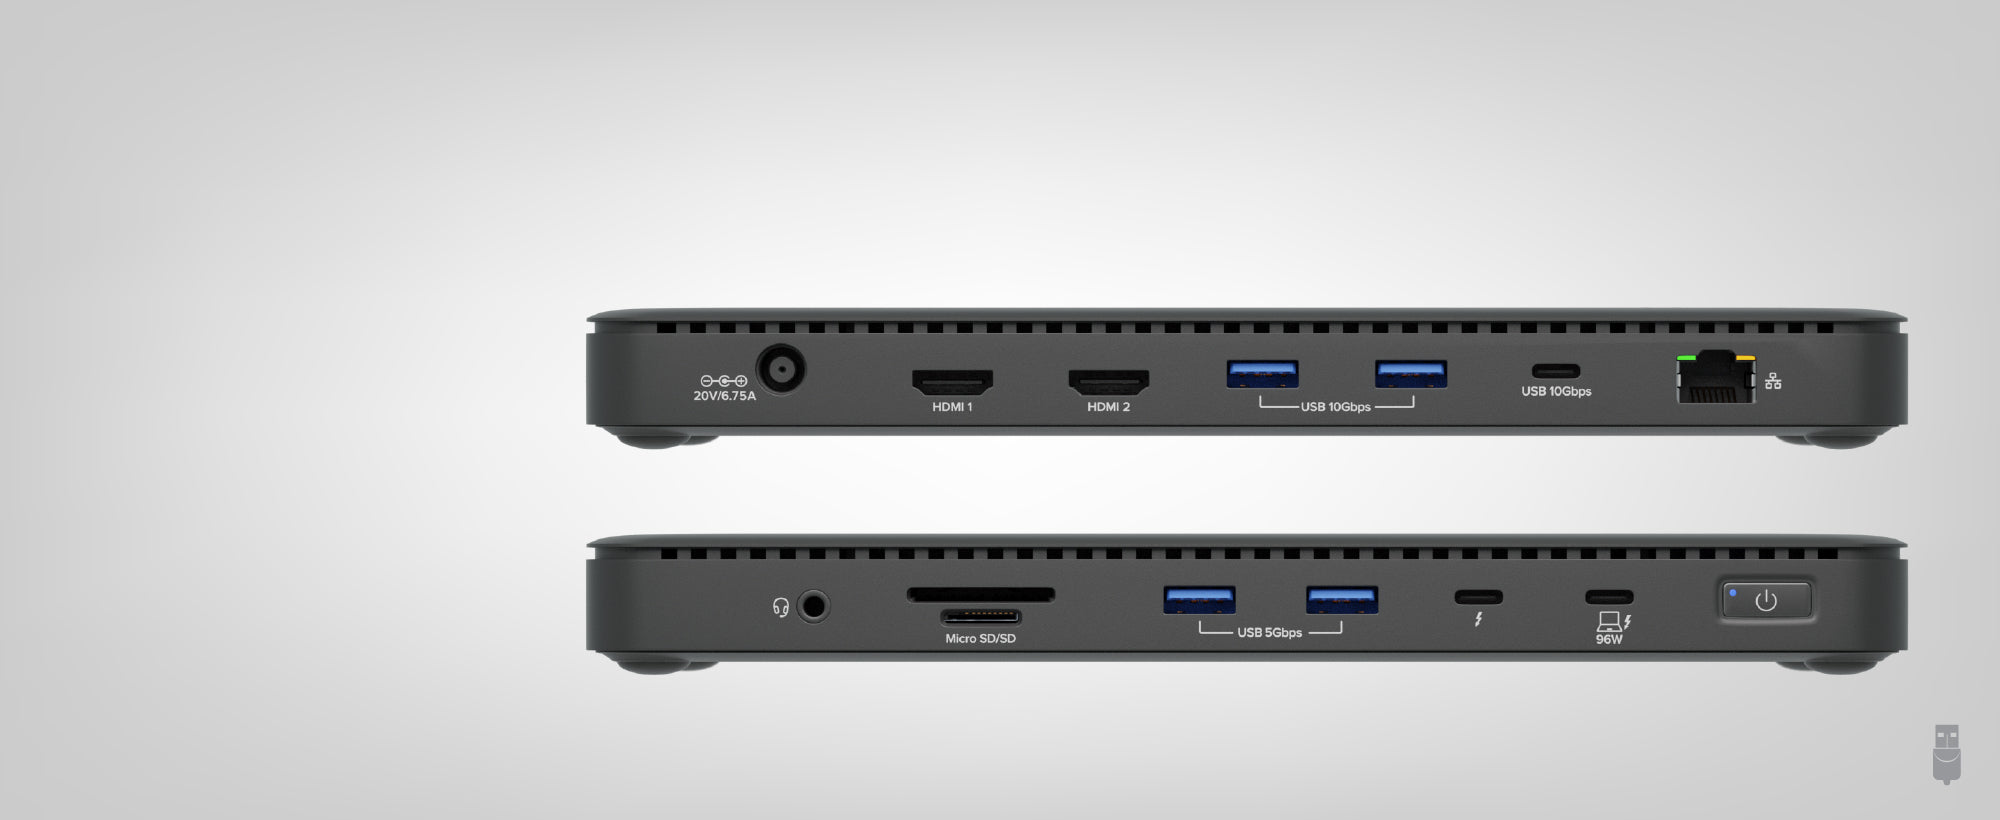 Close up of all of the 13 ports on the TBT4-UD5